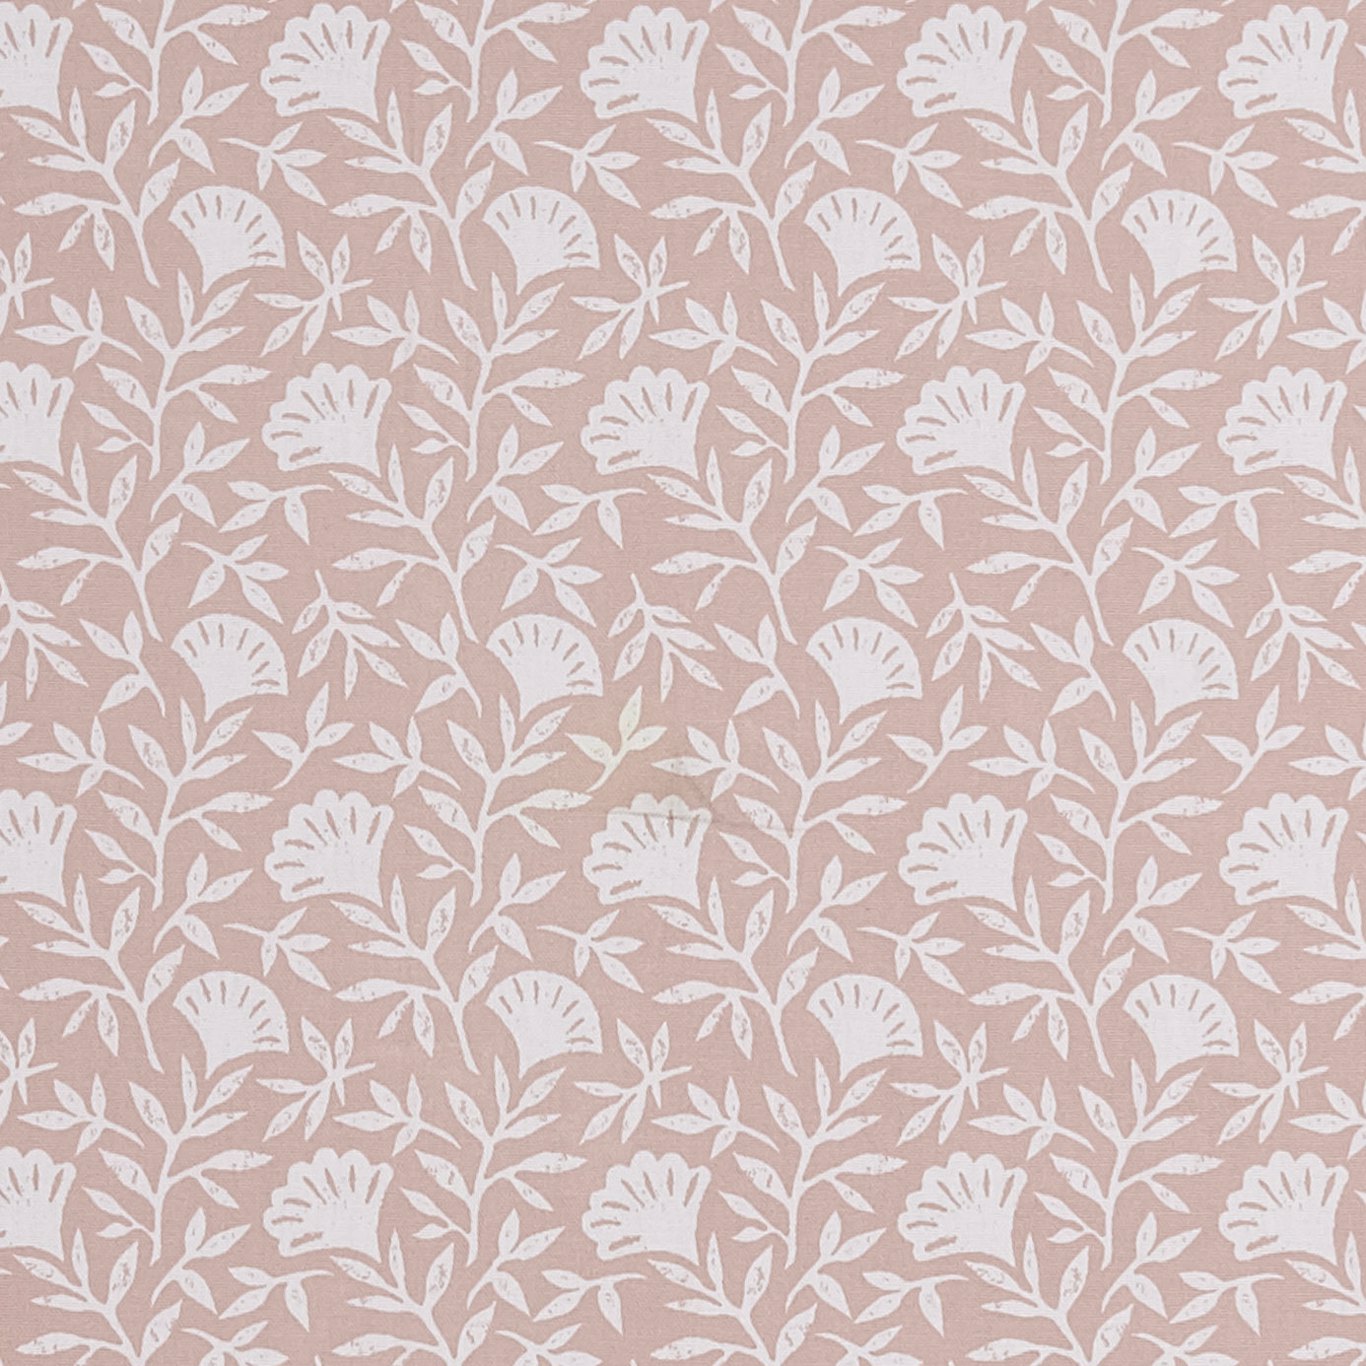 Melby Blush Fabric by STG